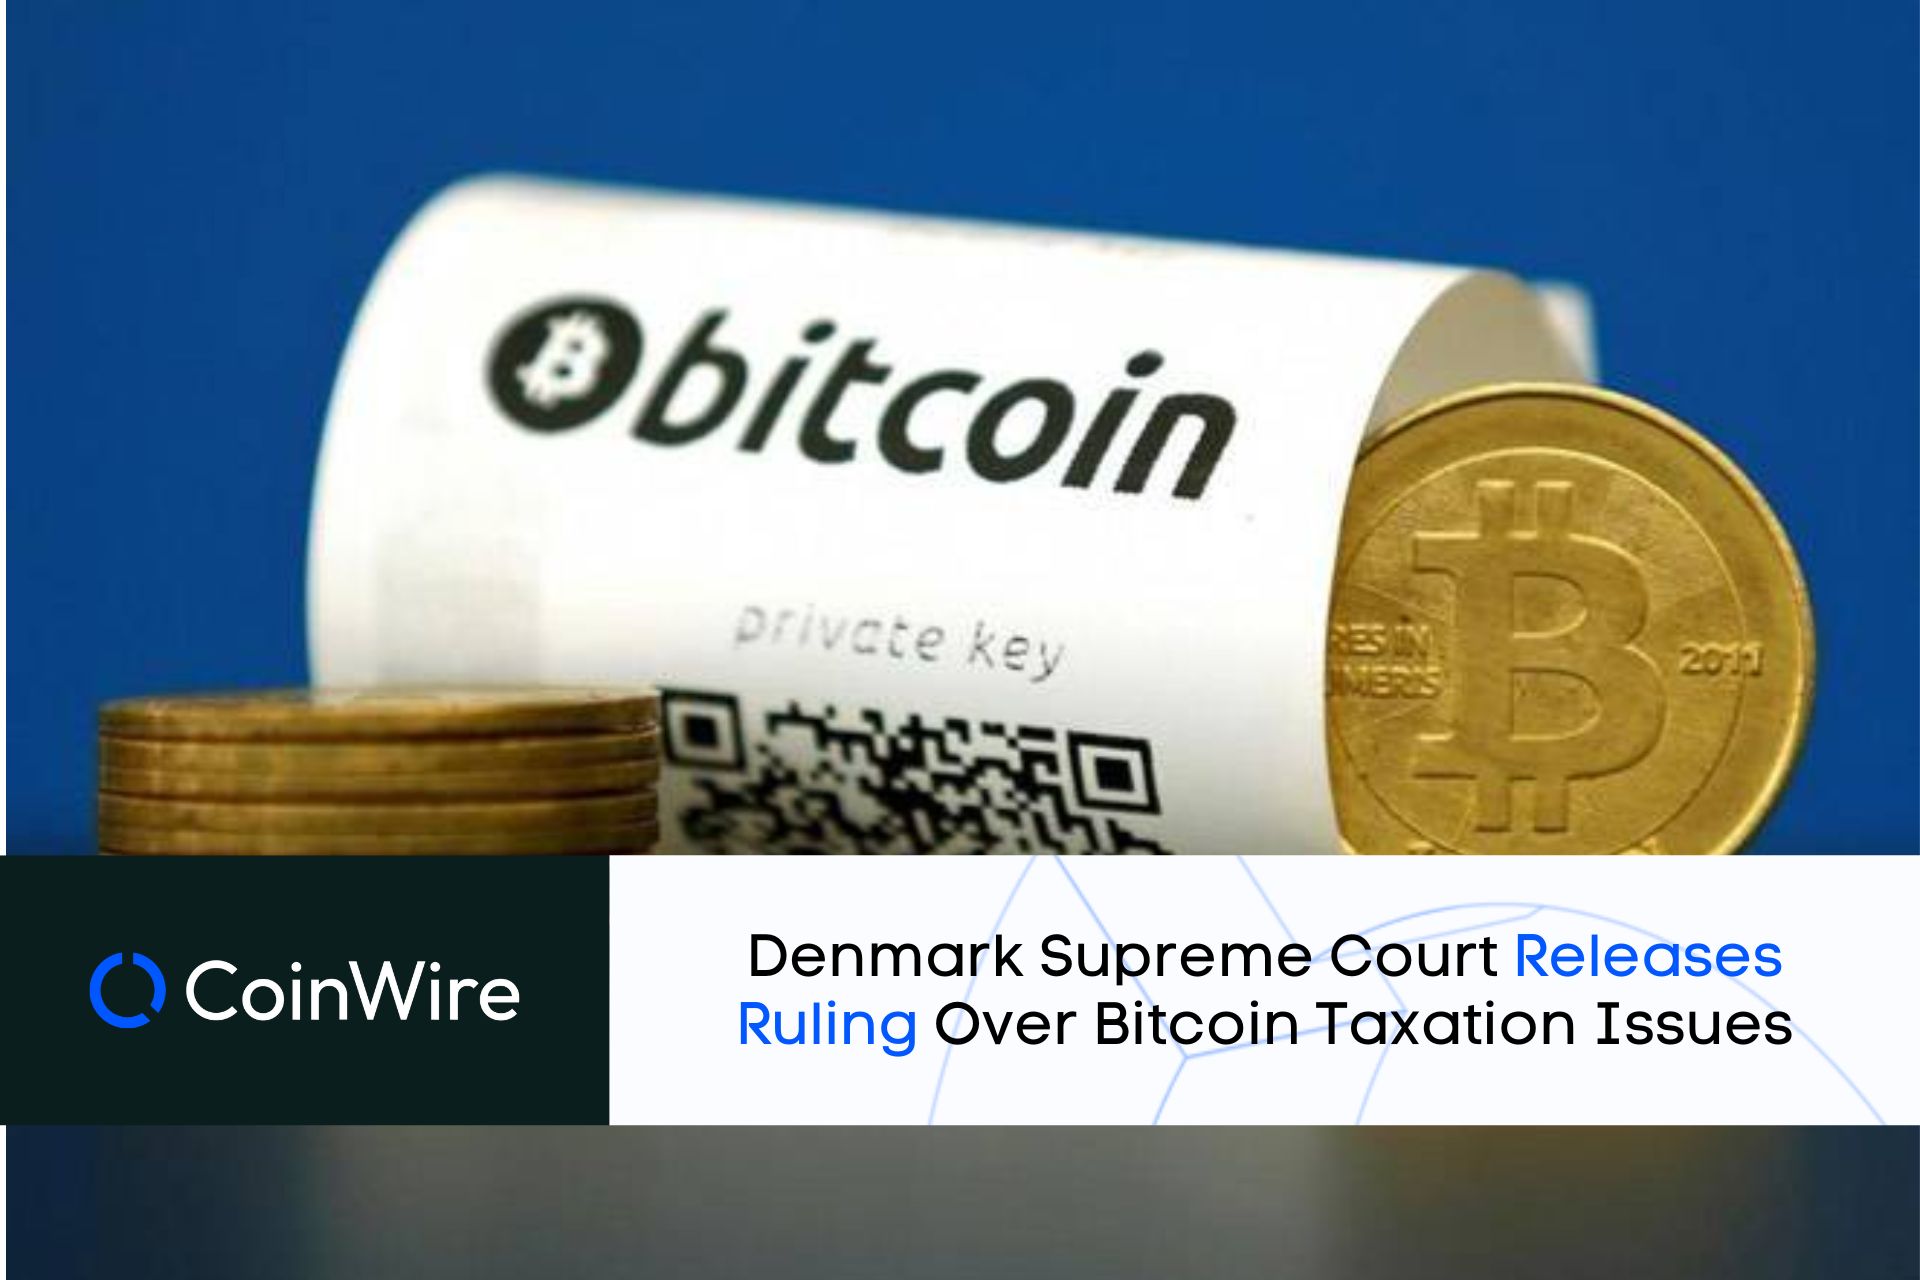 Denmark Supreme Court Releases Ruling Over Bitcoin Taxation Issues